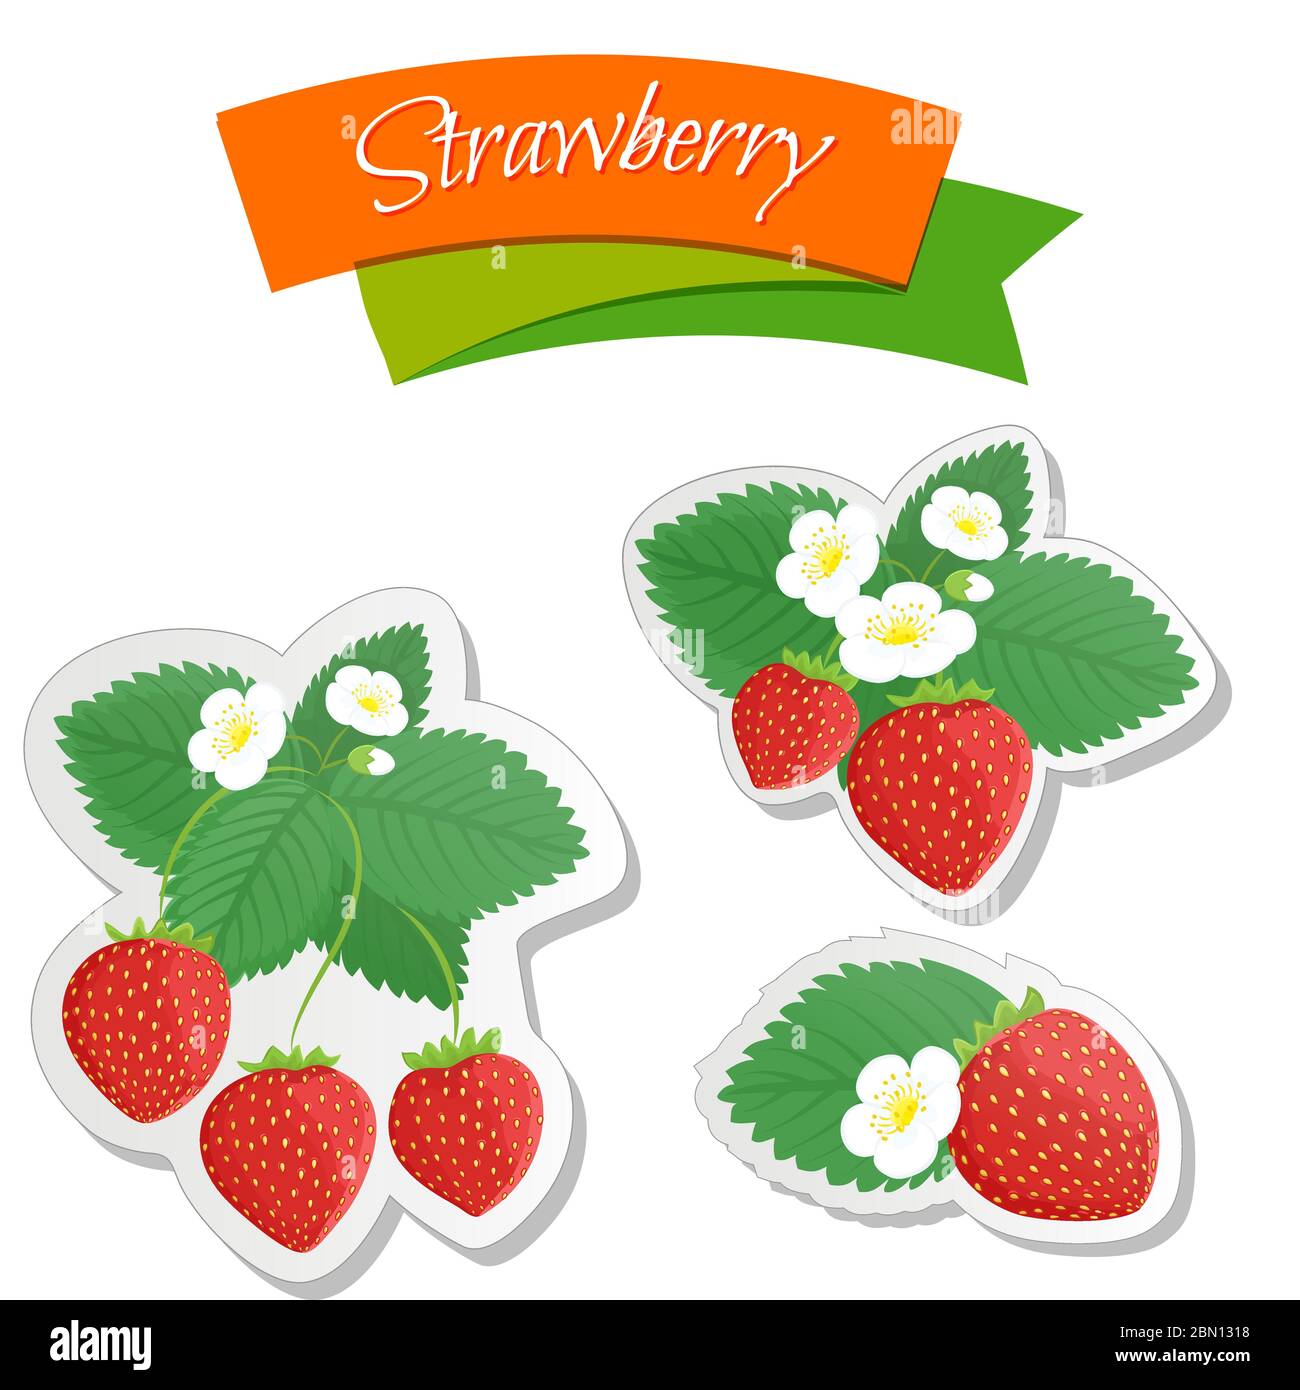 Food label or sticker set. Set of realistic berries, strawberries design template. Vector illustration template isolated on white background Stock Vector